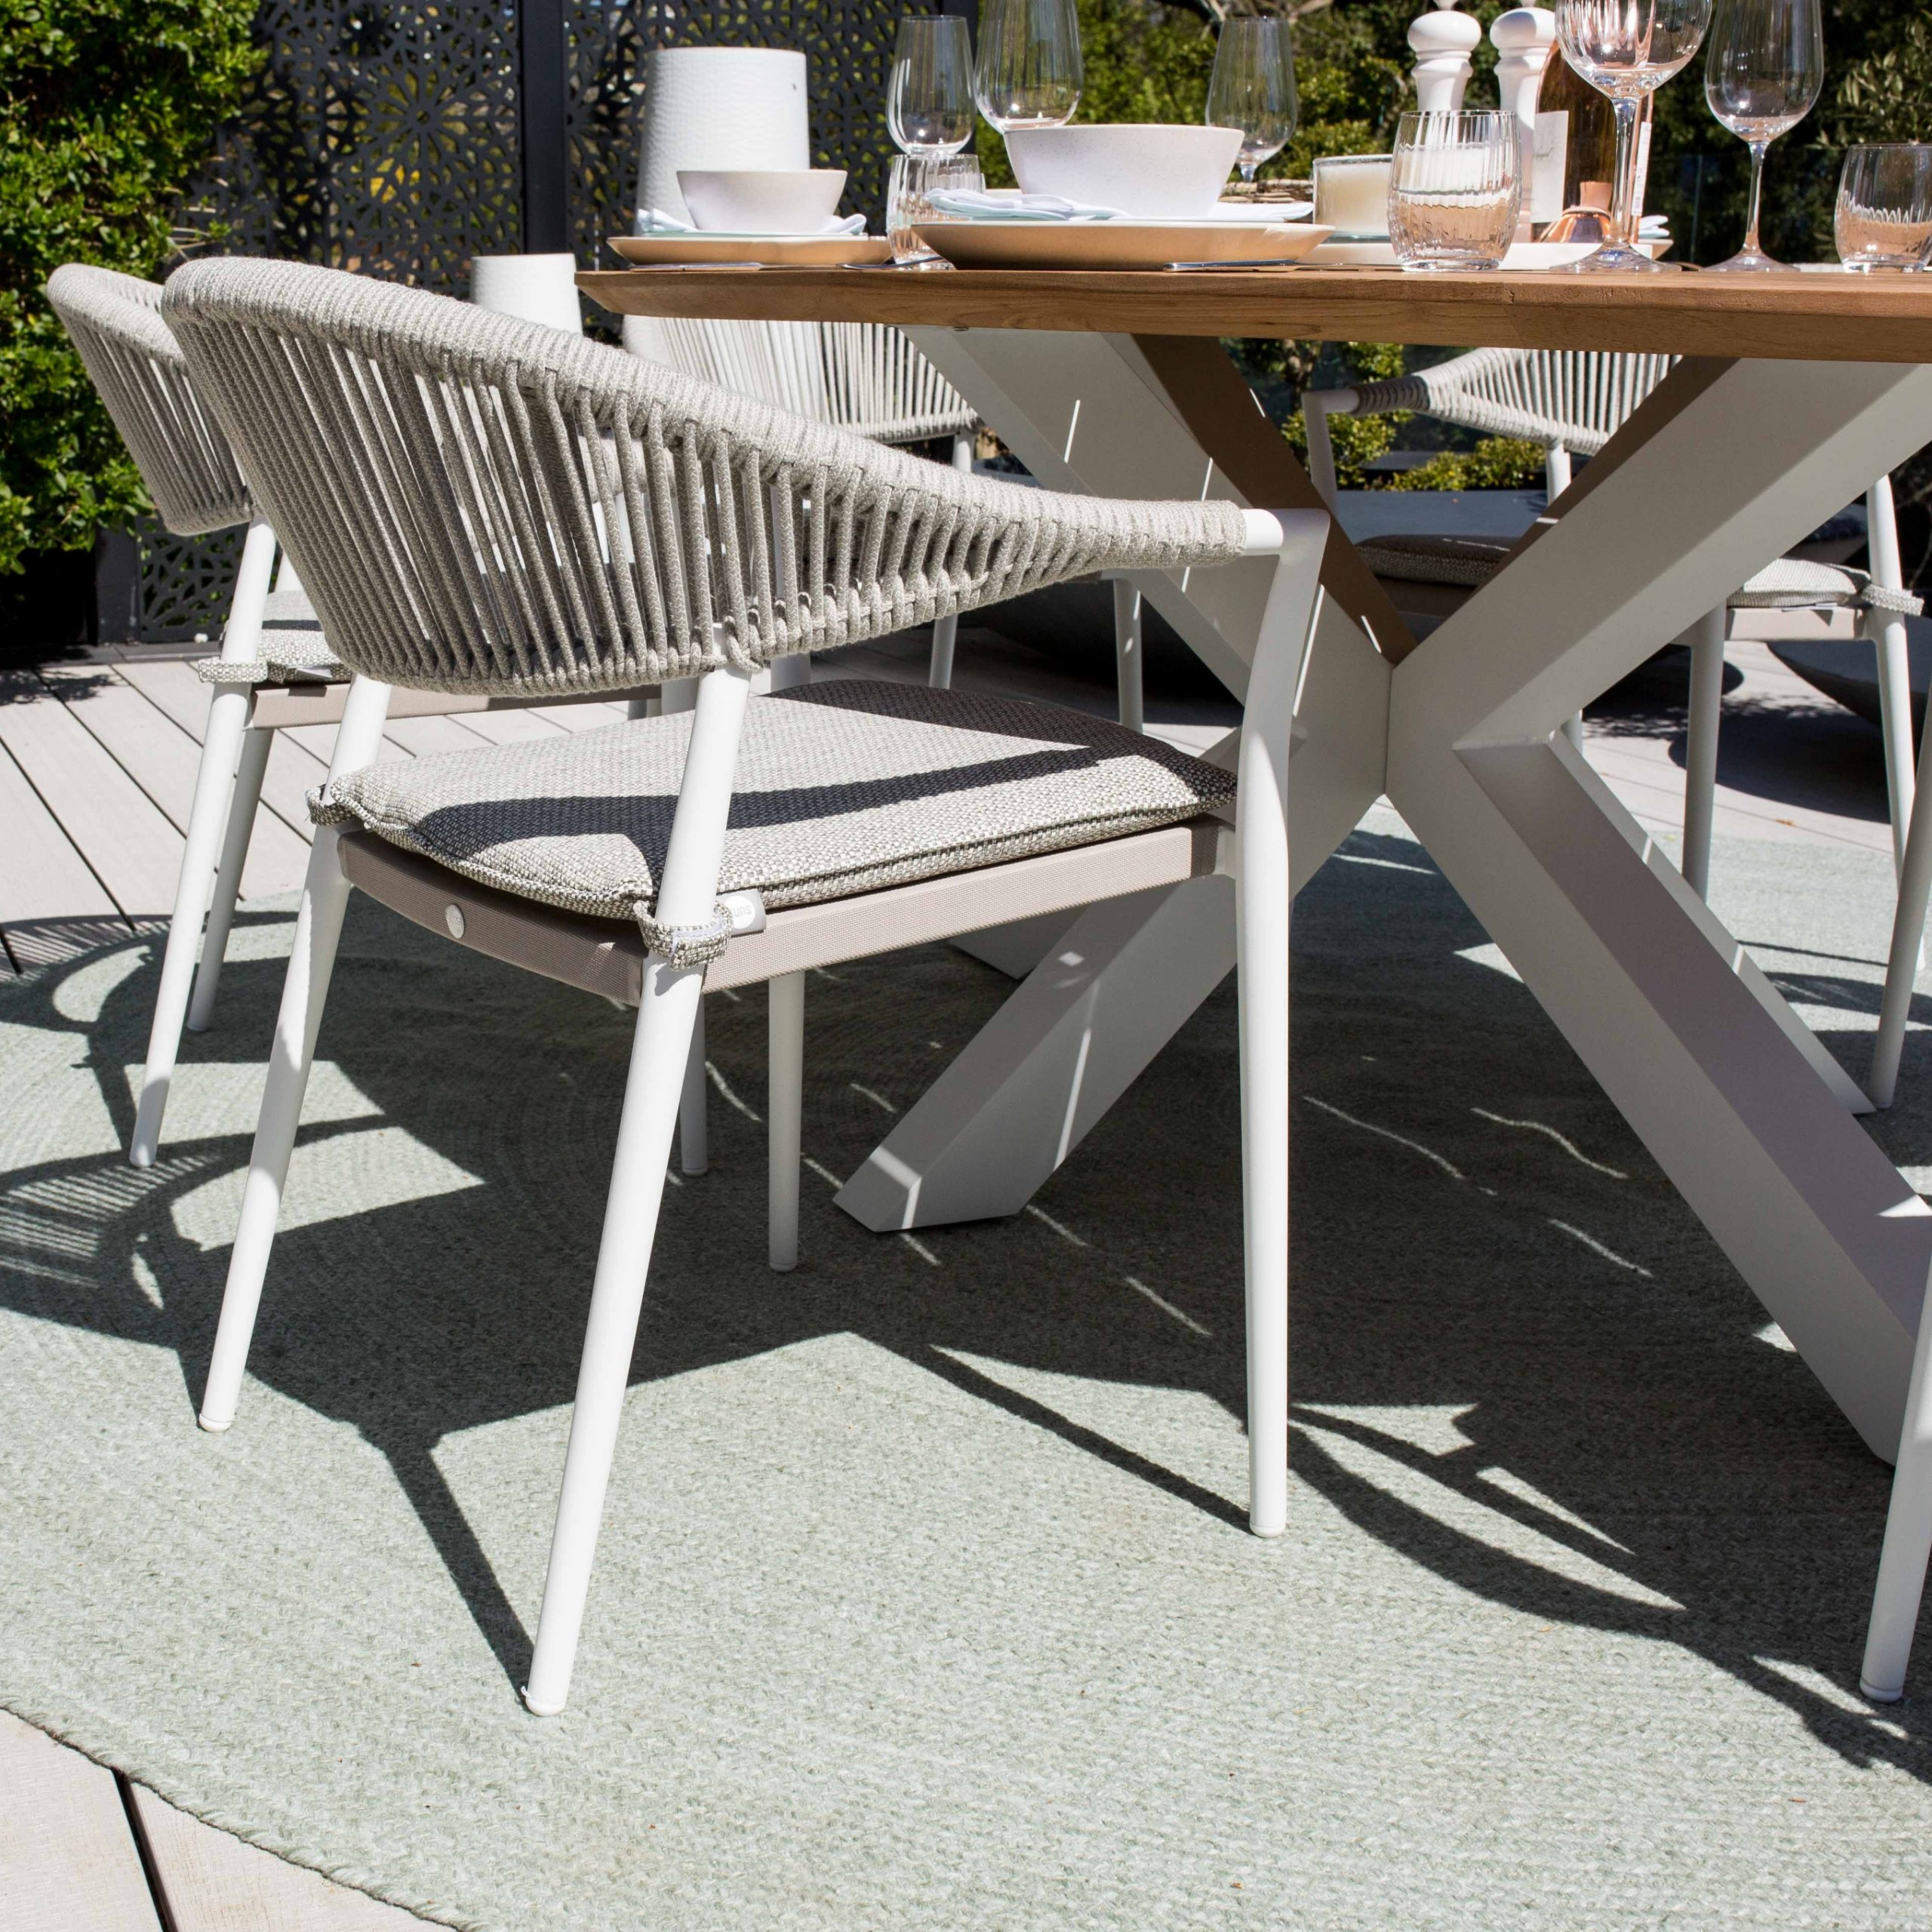 Madre & Matera Outdoor Dining Table & Chairs | Suns Lifestyle